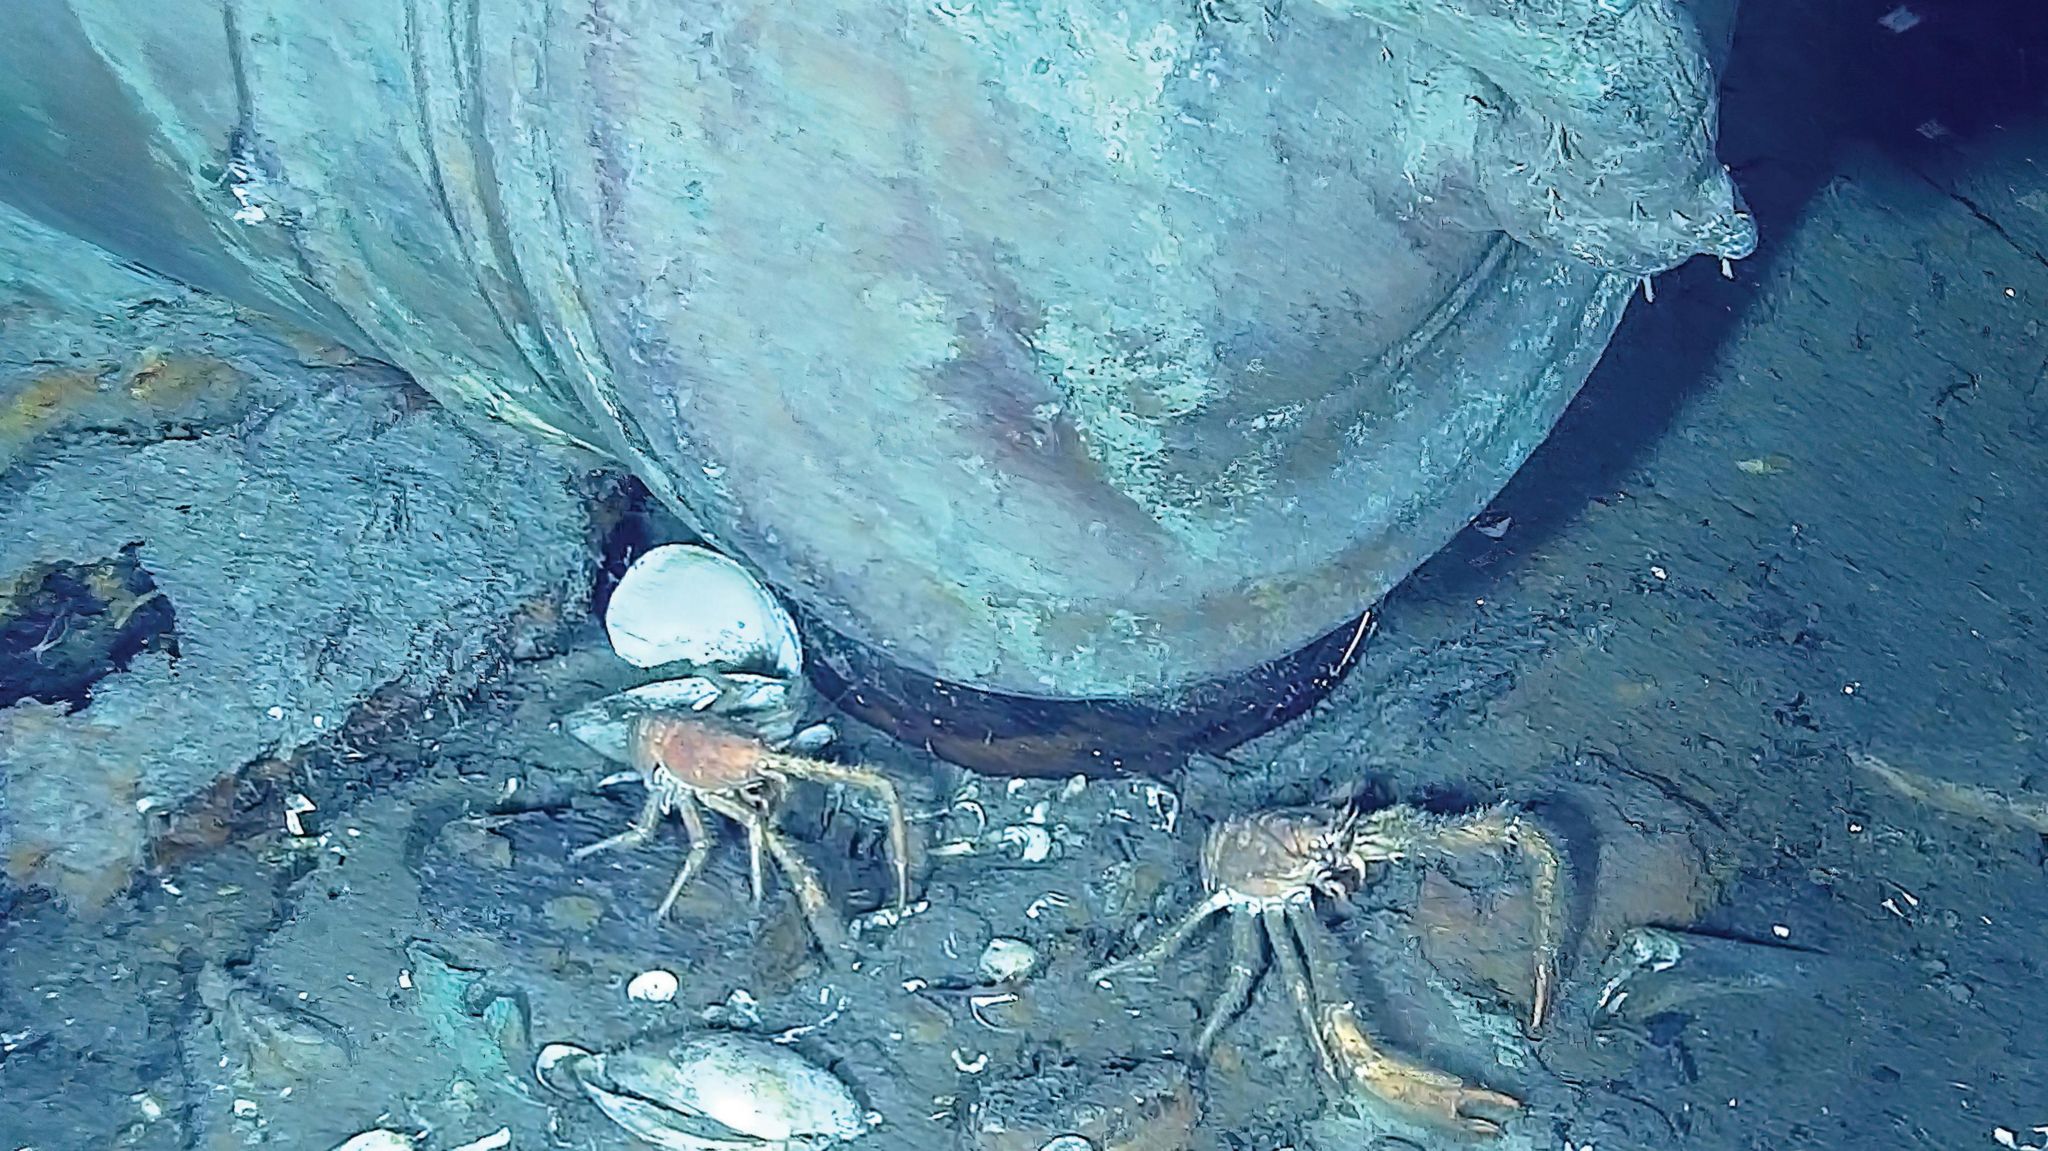 Crabs move around one of the San Jose's cannons on the seabed.